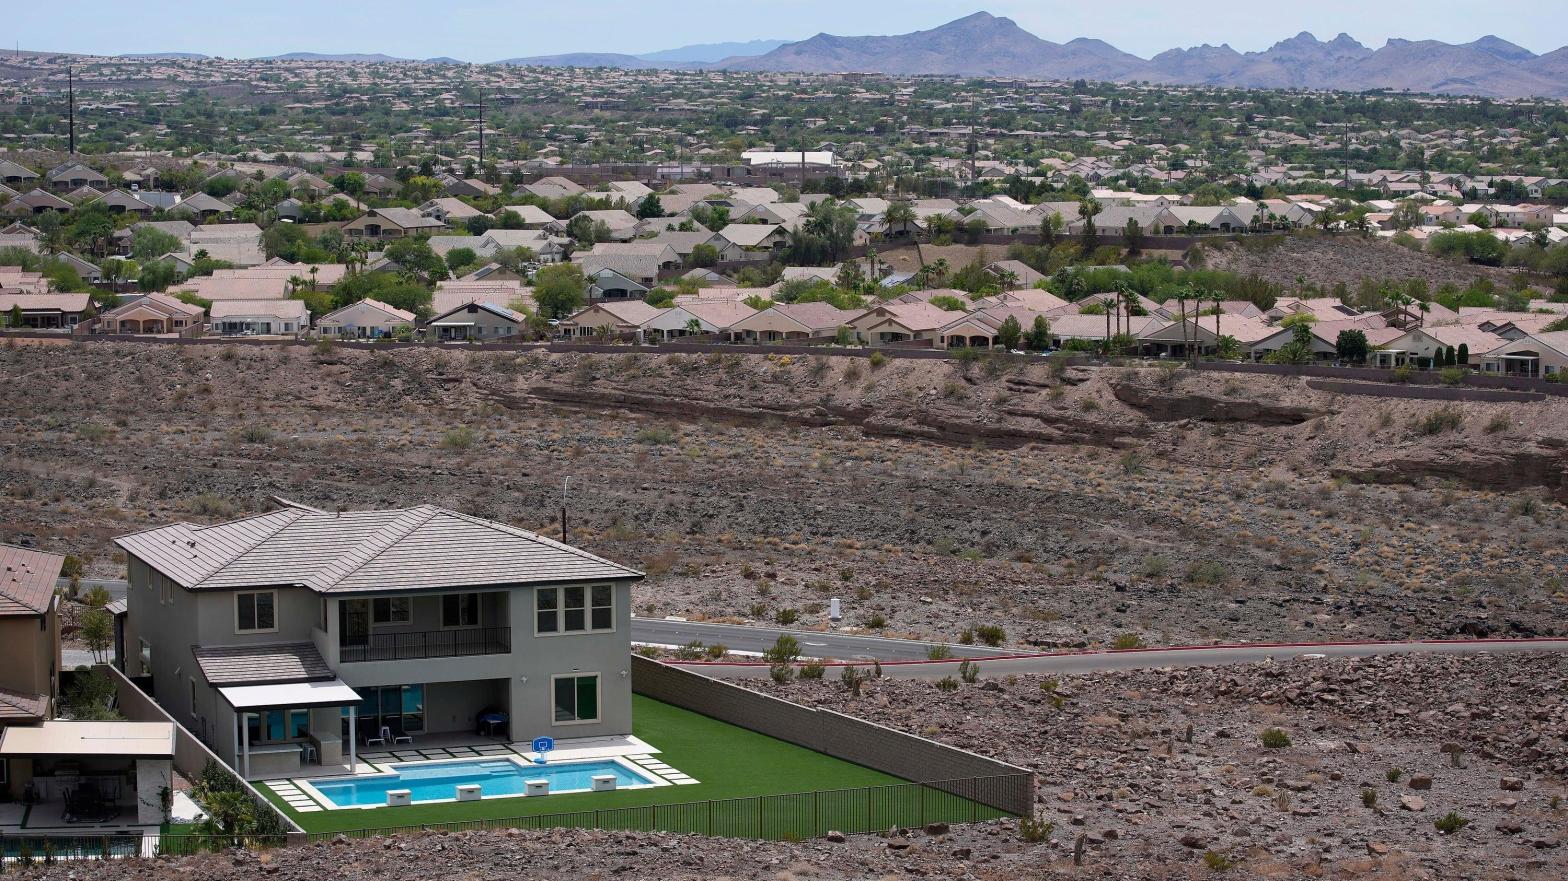 A house with a swimming pool in the desert near Las Vegas, NV. (Photo: John Locher, AP)